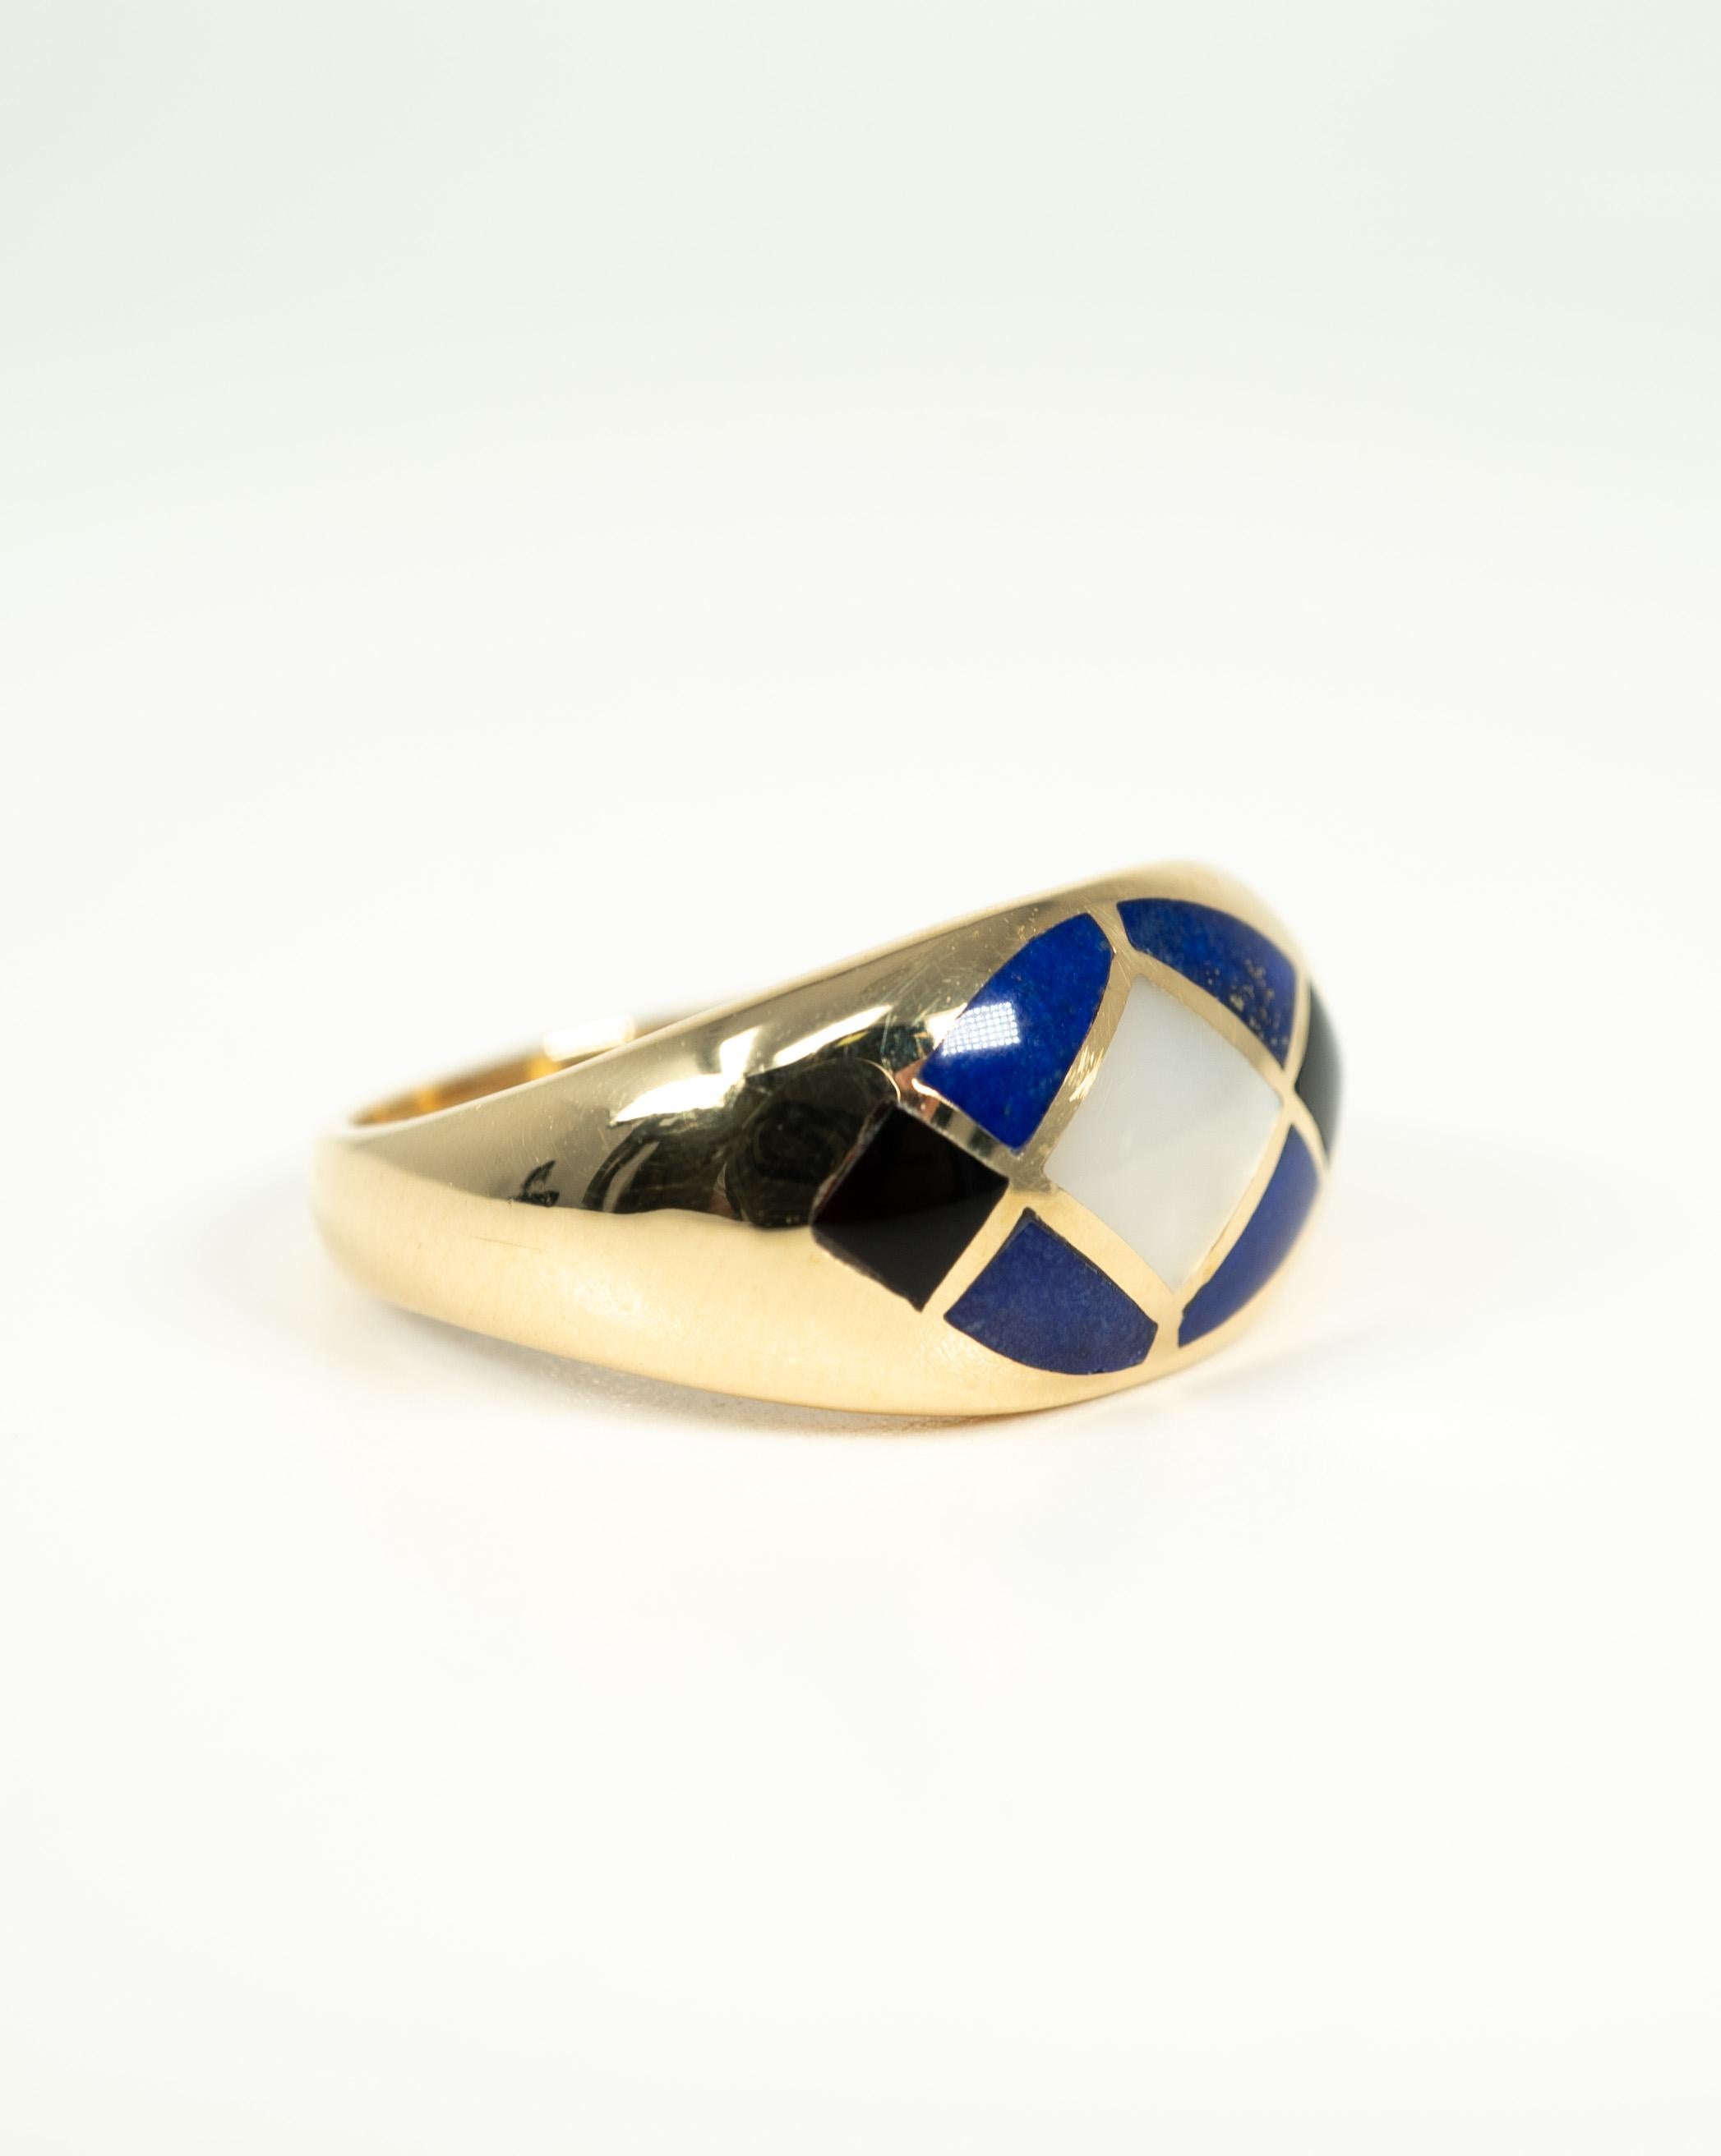 In 14 karat yellow gold, this ring features beautiful inlays of mother-of-pearl, lapis lazuli and onyx!